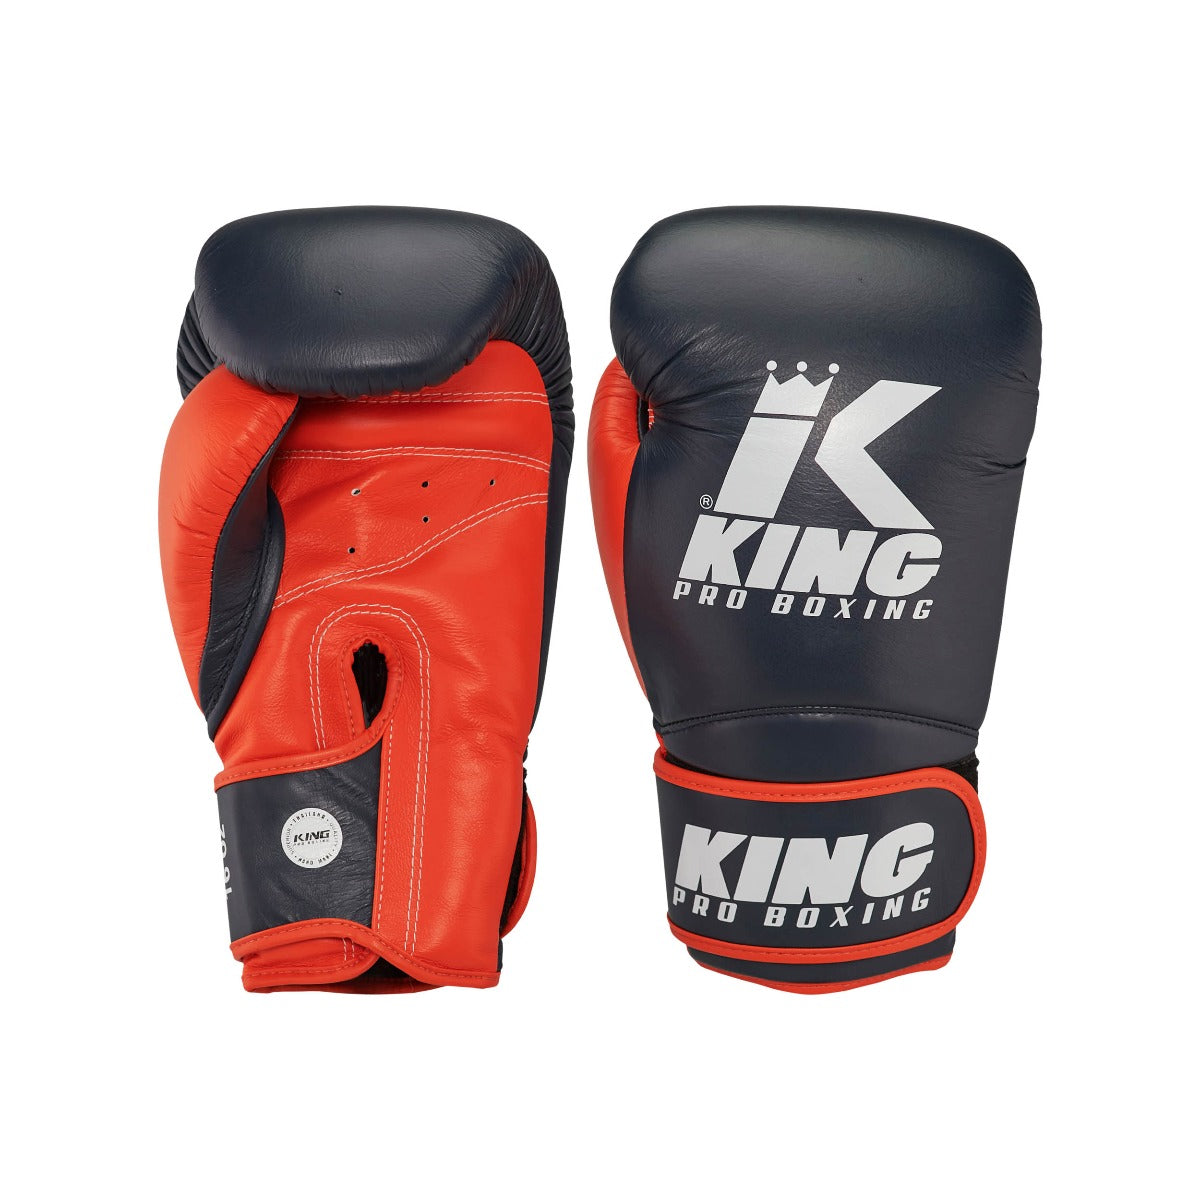 King PRO boxing boxing gloves - STAR 15